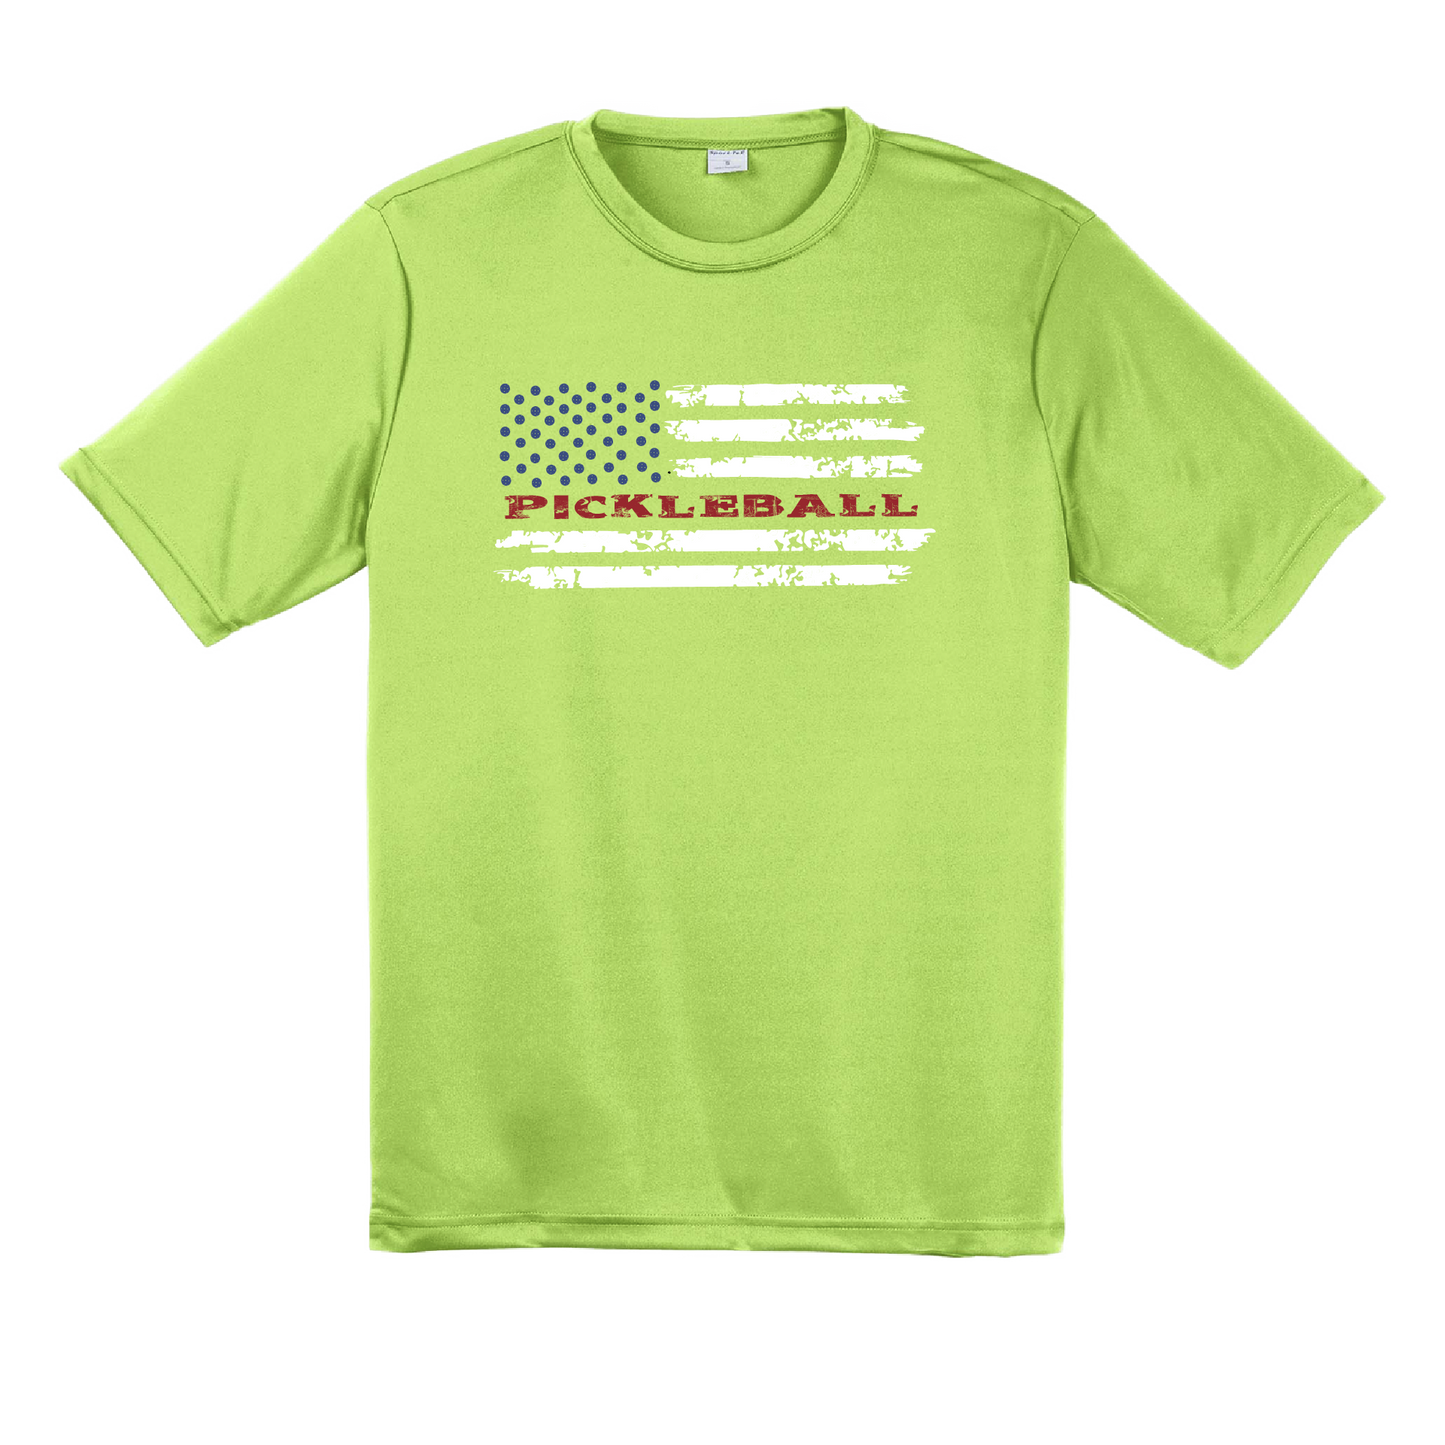 Pickleball Design: Pickleball Horizontal Flag on Front or Back Shirt  Men's Styles: Short-Sleeve  Shirts are lightweight, roomy and highly breathable. These moisture-wicking shirts are designed for athletic performance. They feature PosiCharge technology to lock in color and prevent logos from fading. Removable tag and set-in sleeves for comfort.